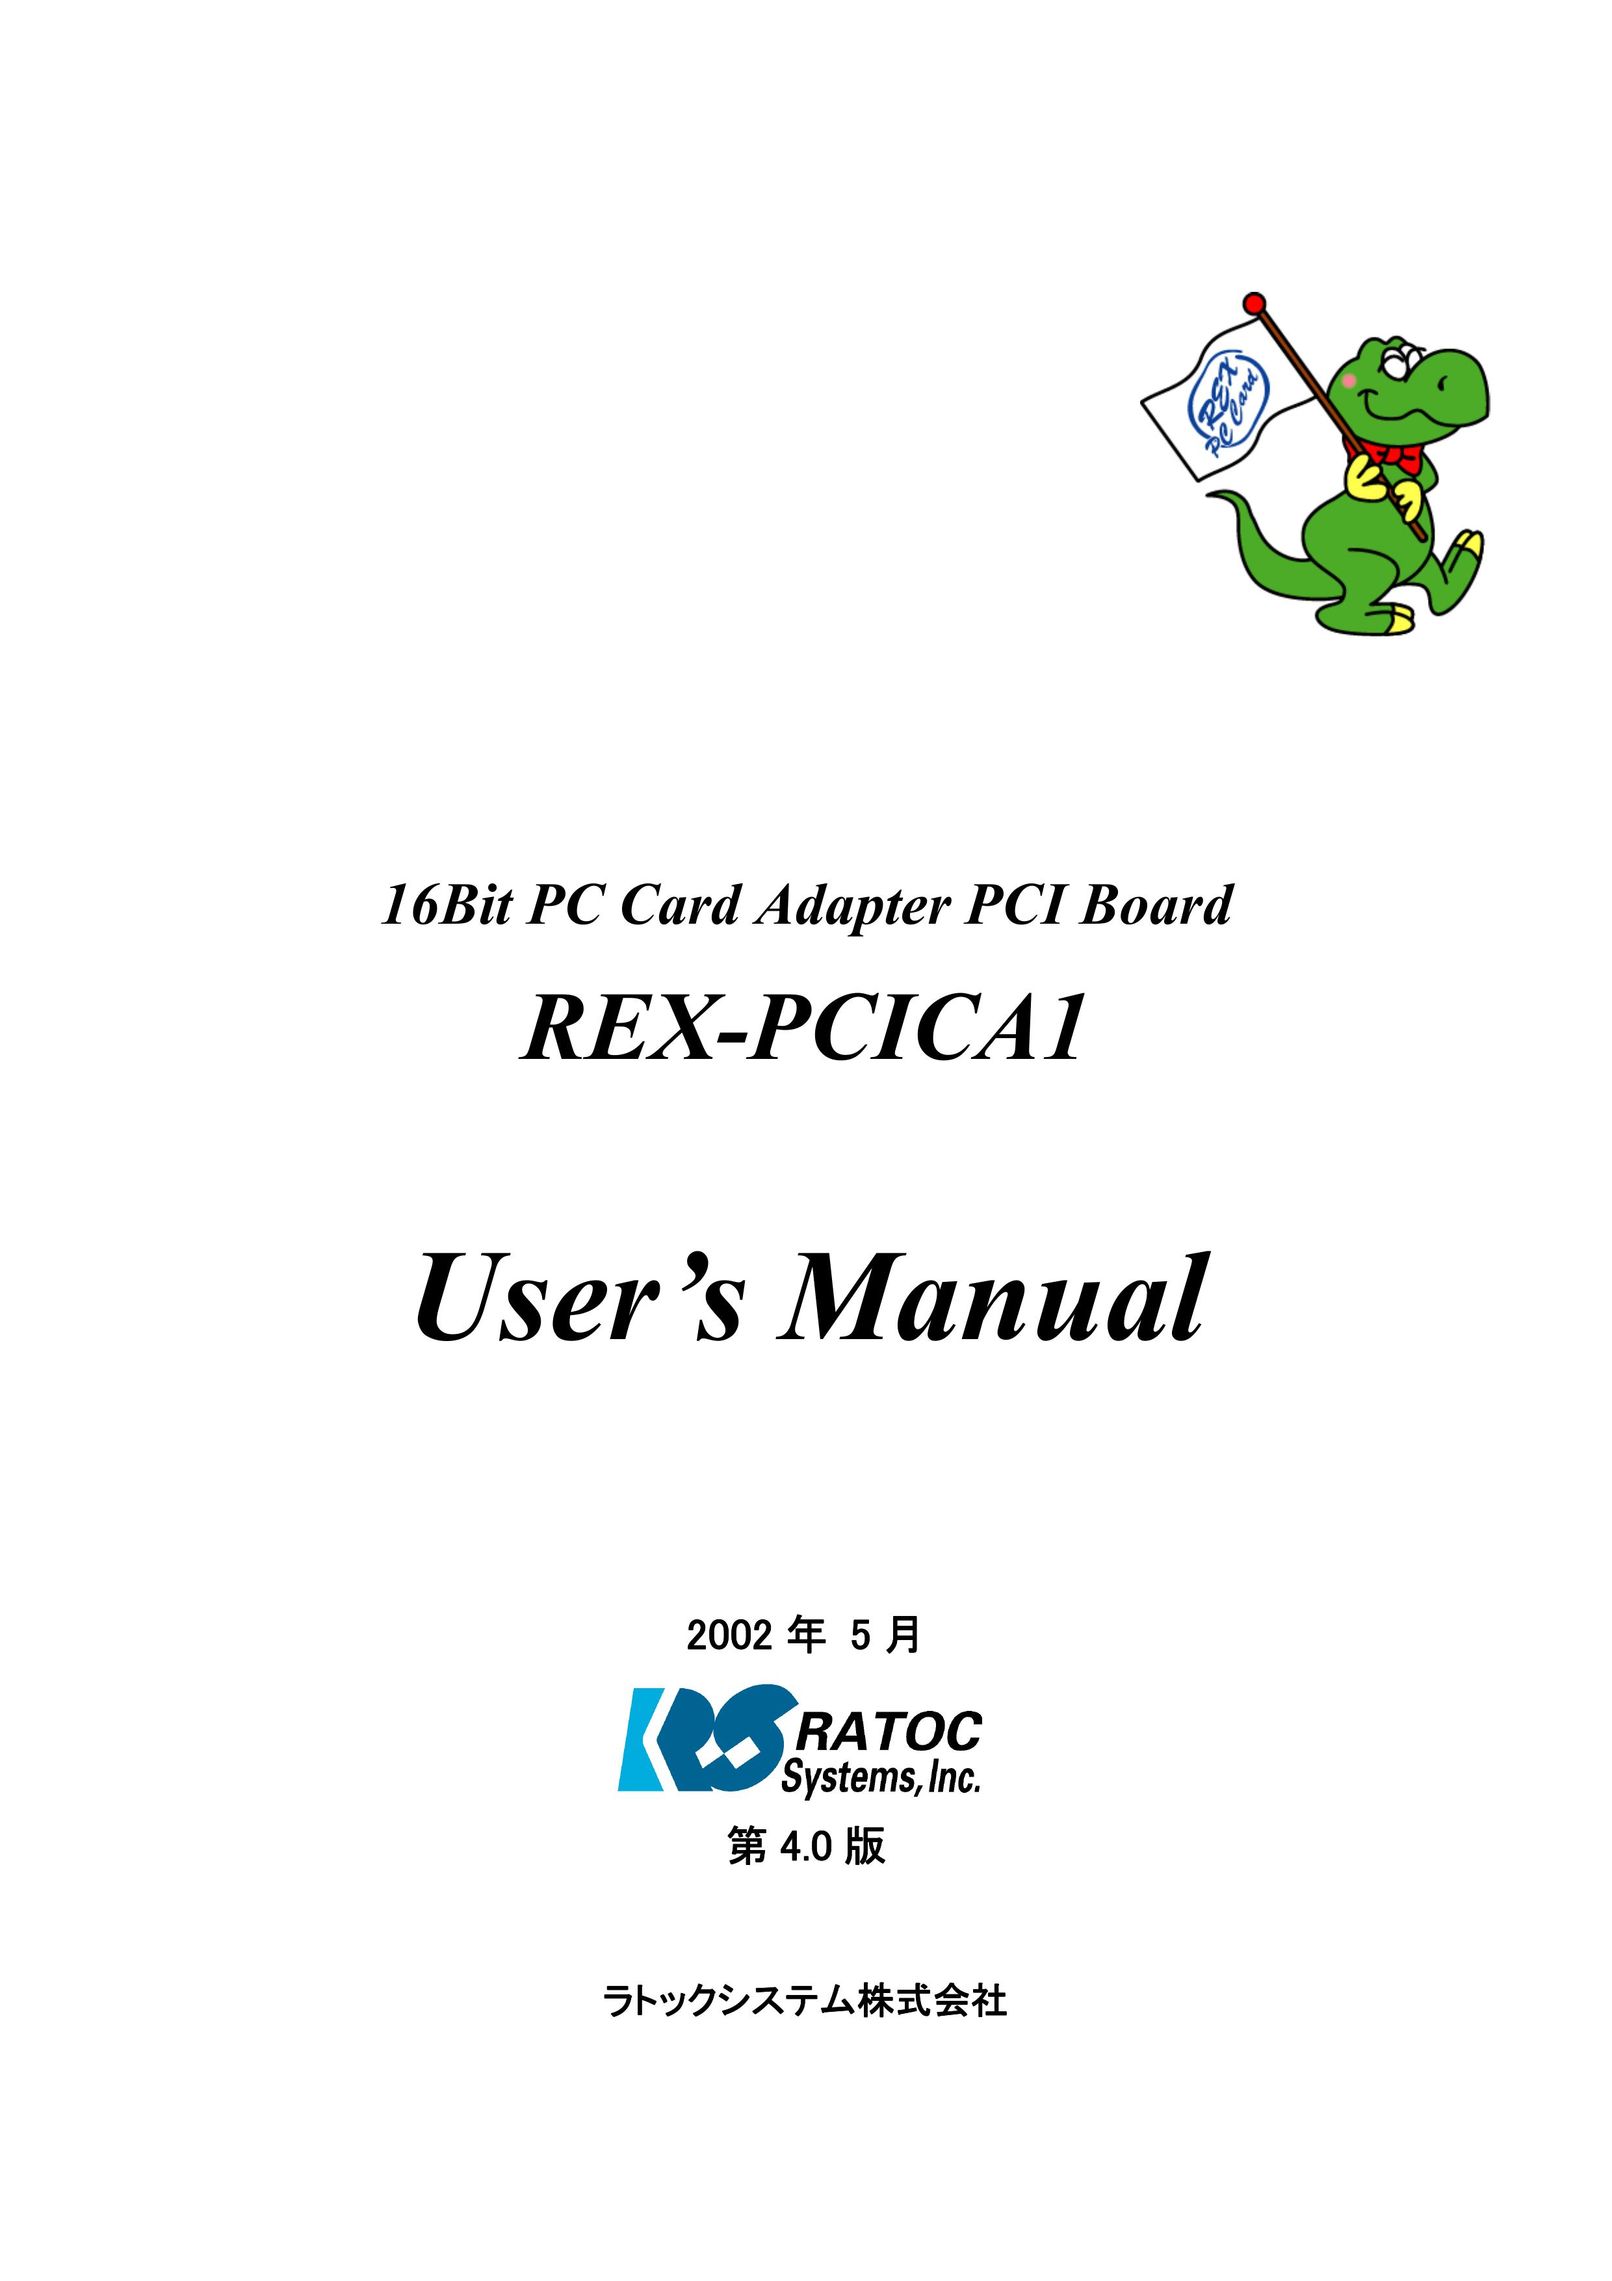 Ratoc Systems REX-PCICA1 Network Card User Manual